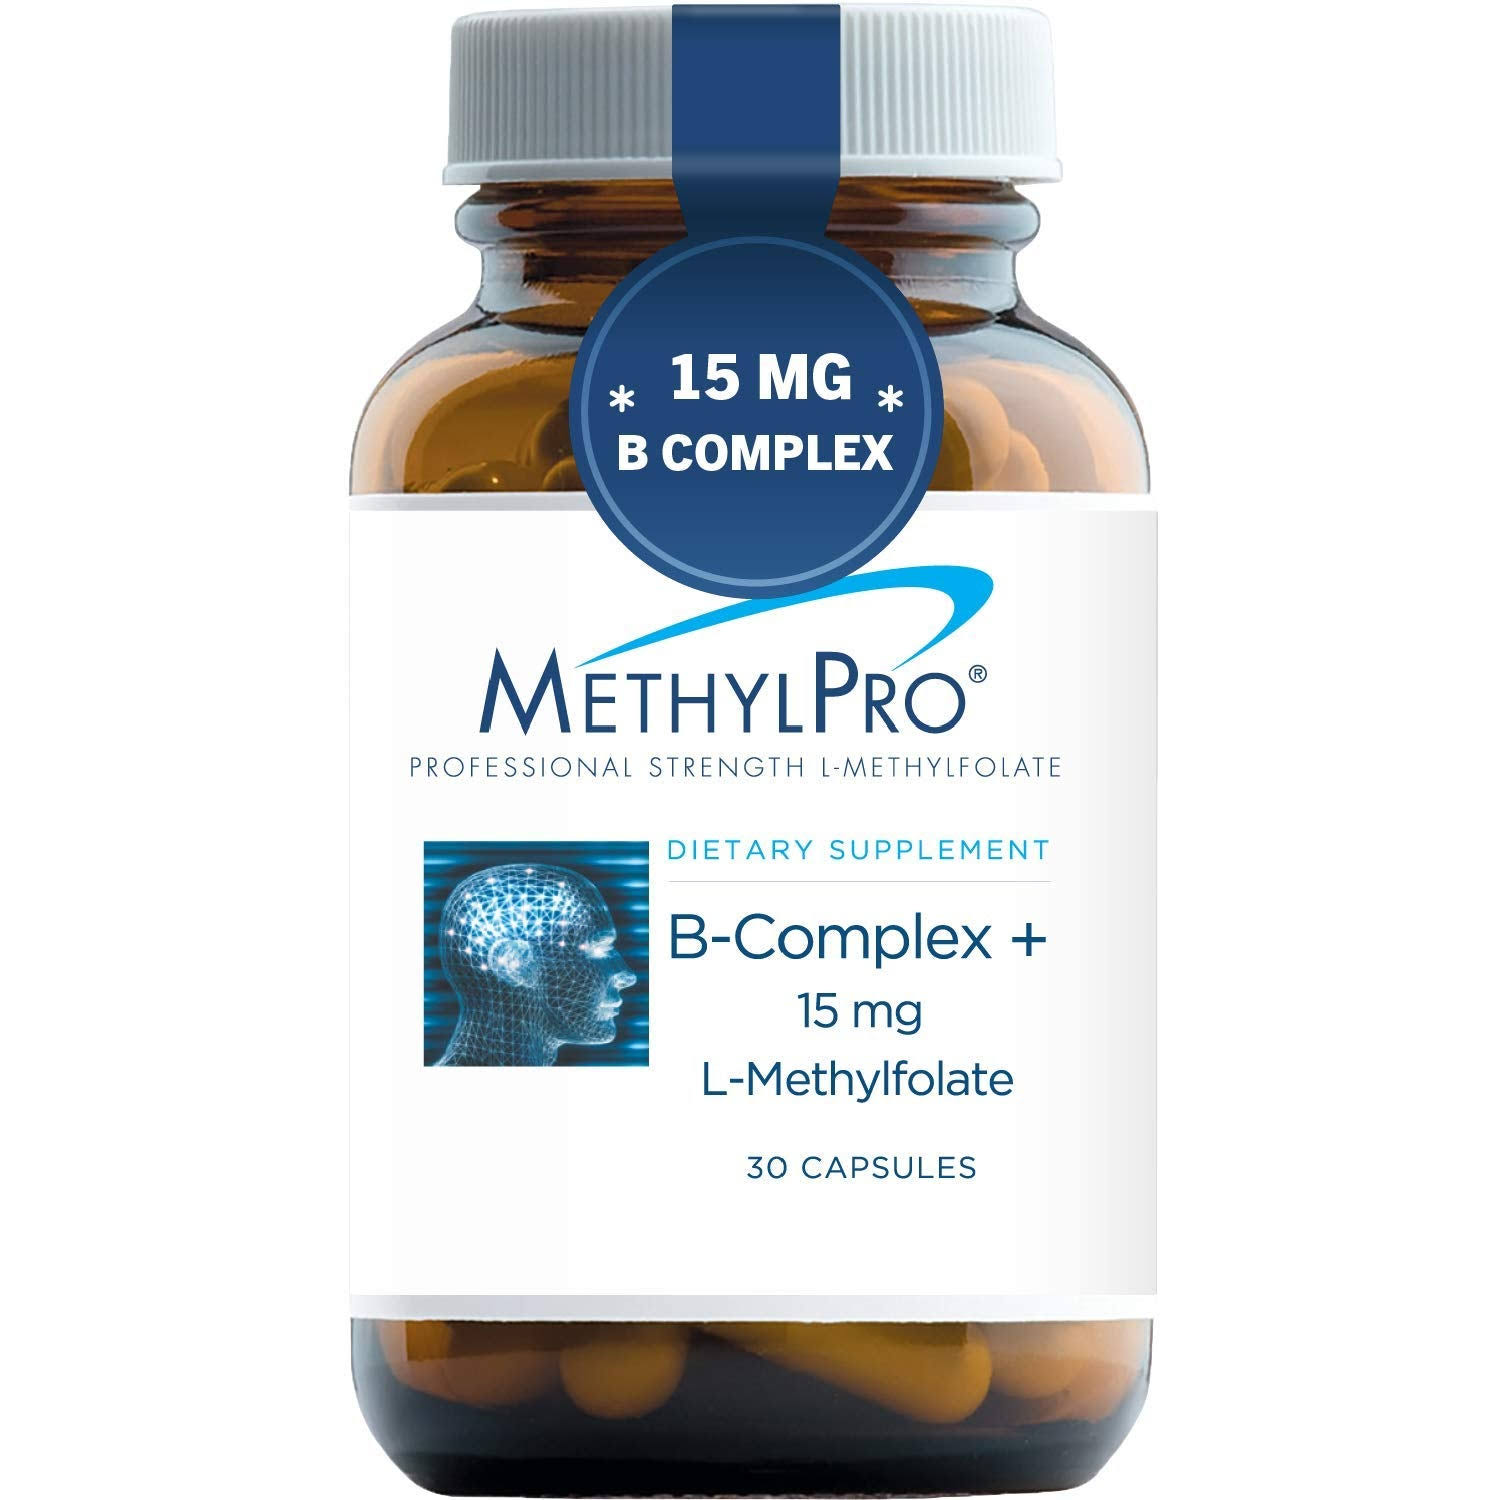 MethylPro B-Complex + 15 MG L-Methylfolate - Active Folate and B